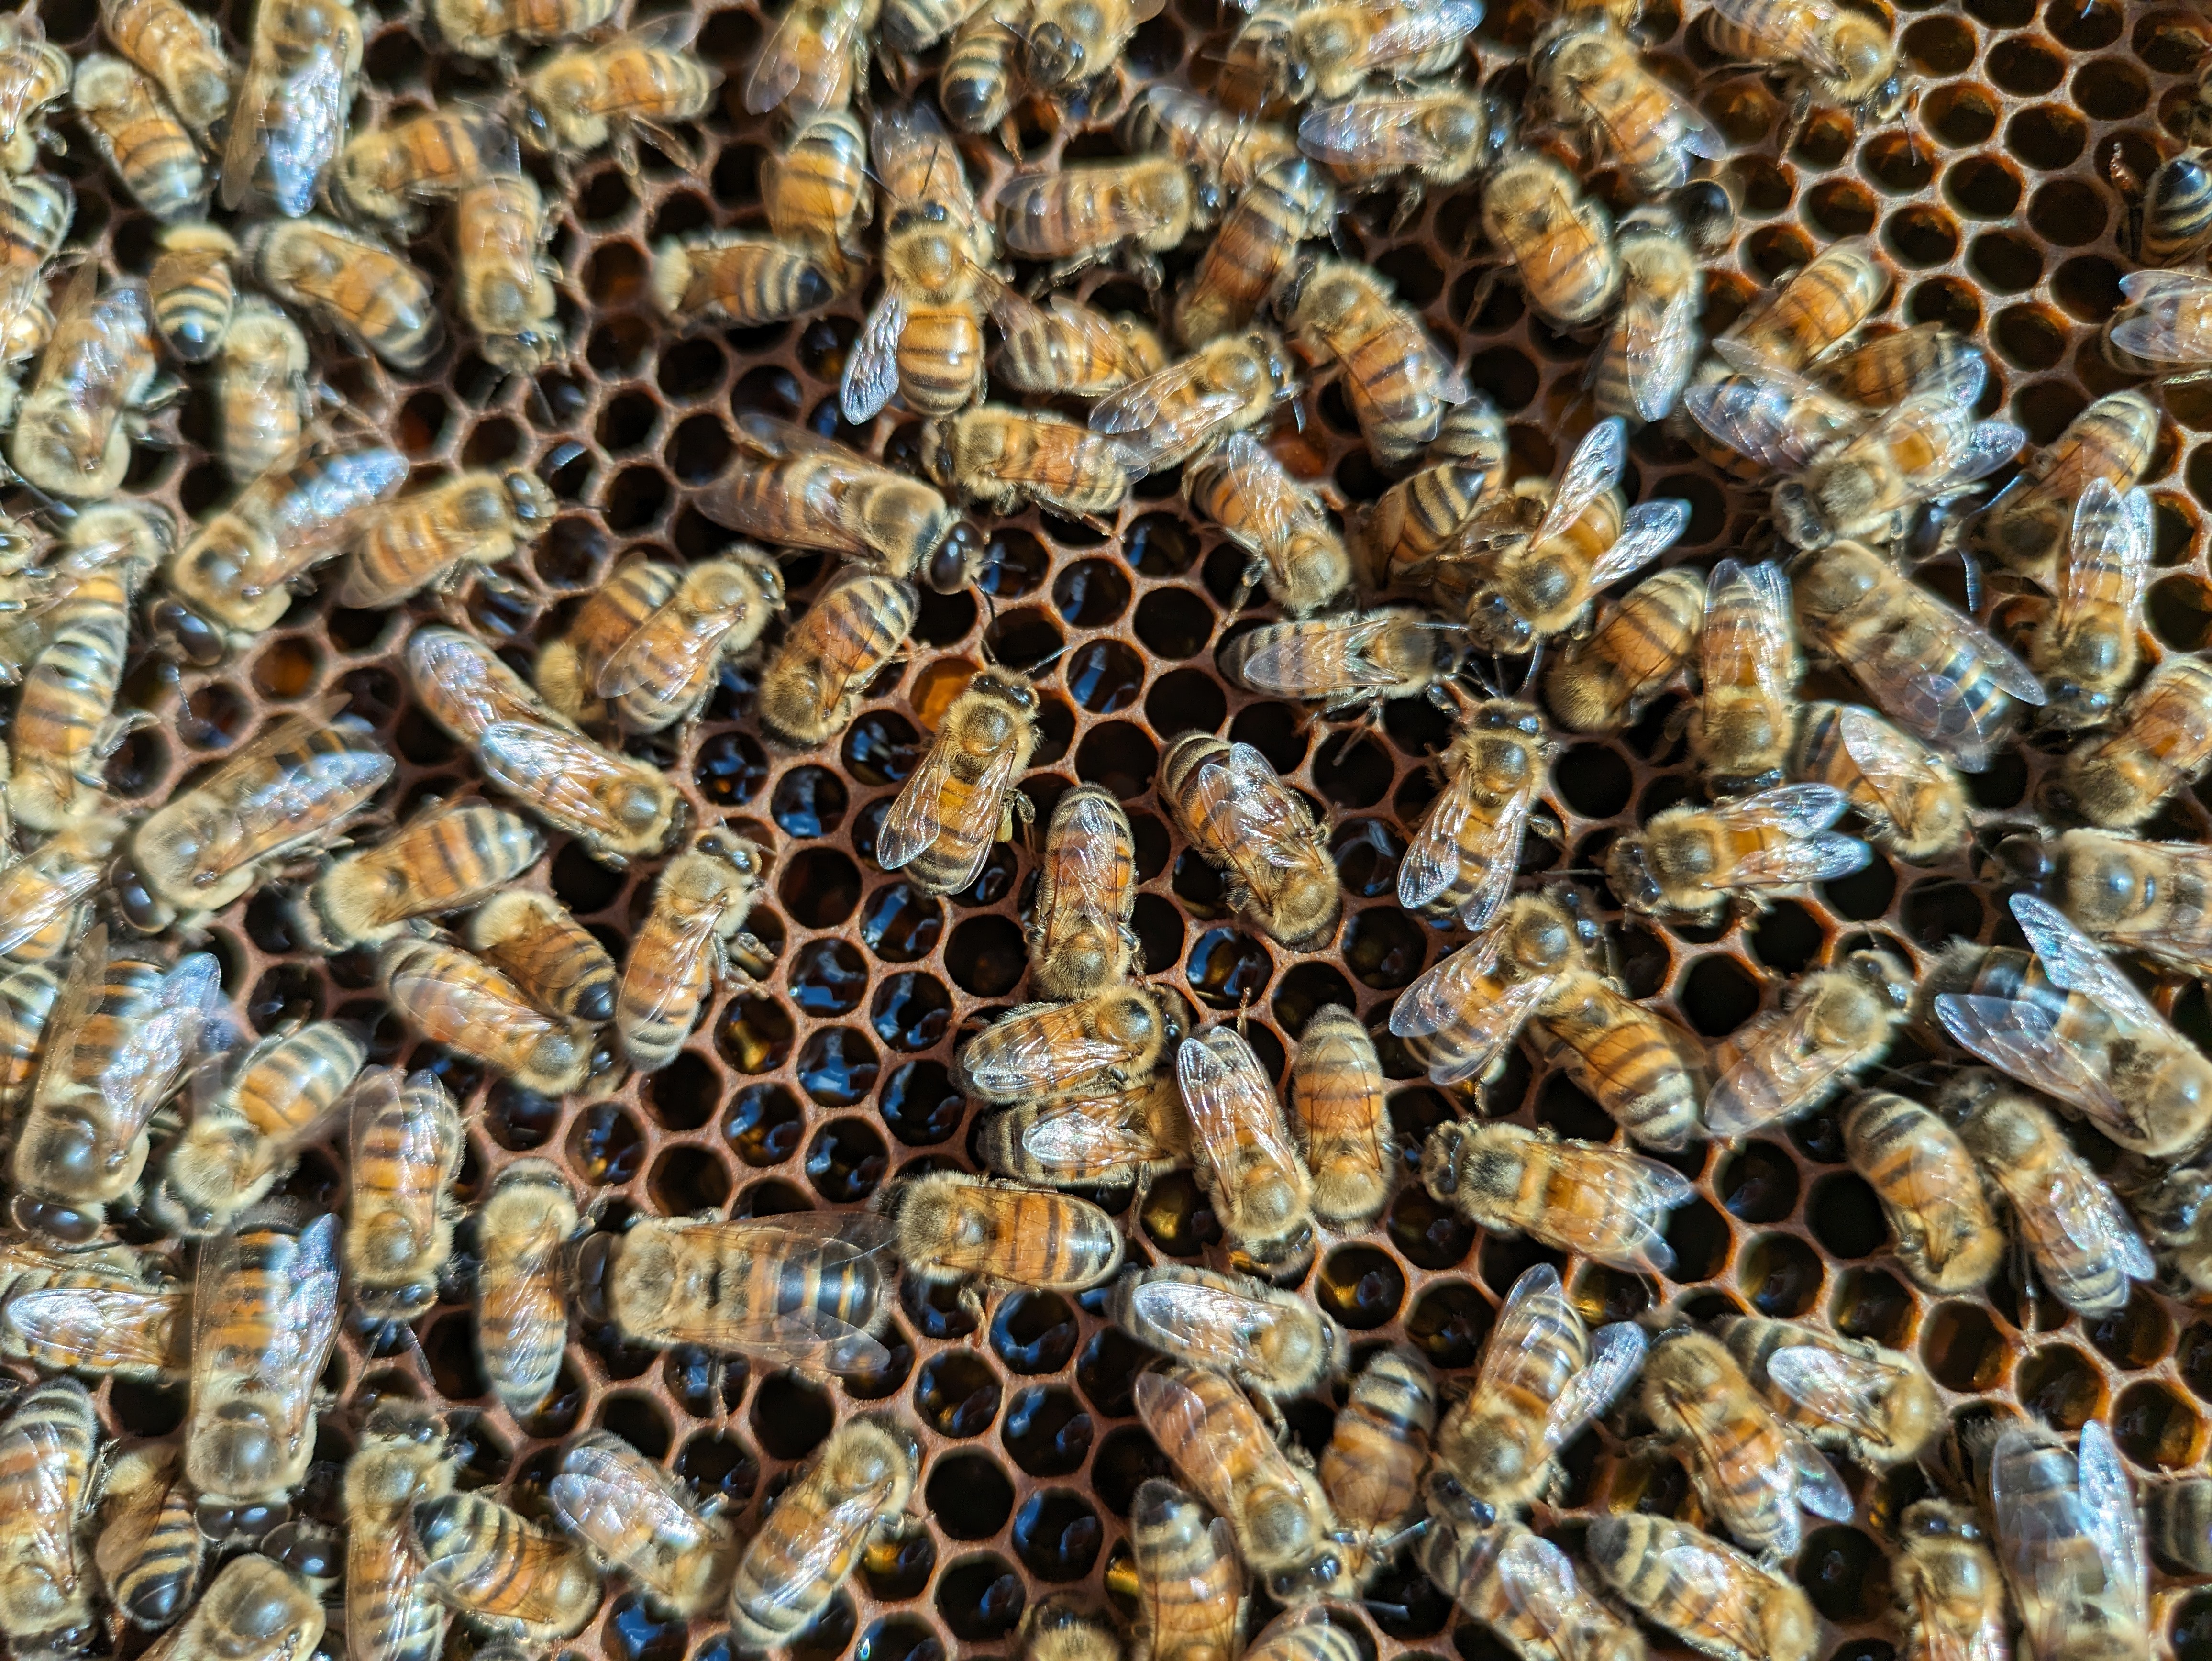 frame of bees with dark nectar in the hexagon cells.